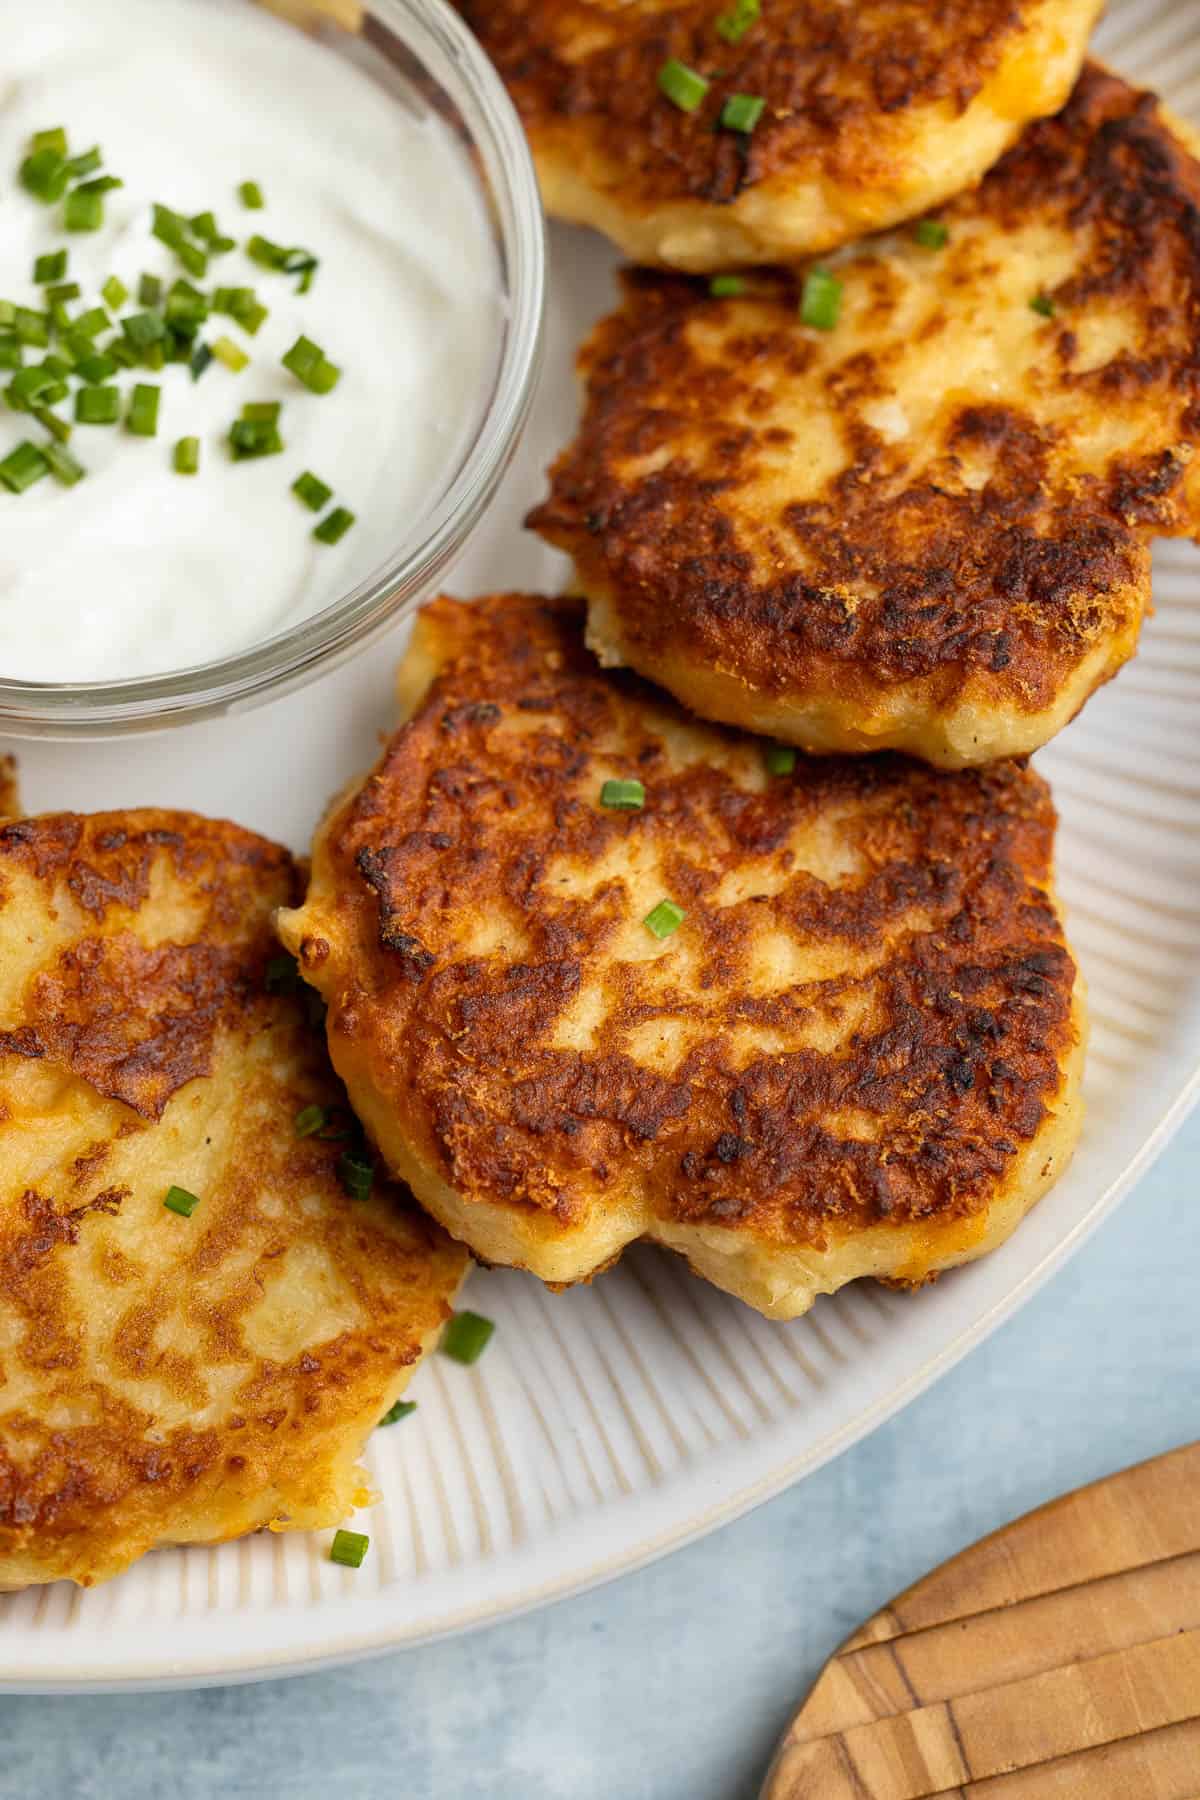 Pan-fried potato cakes on a plate with sour cream.